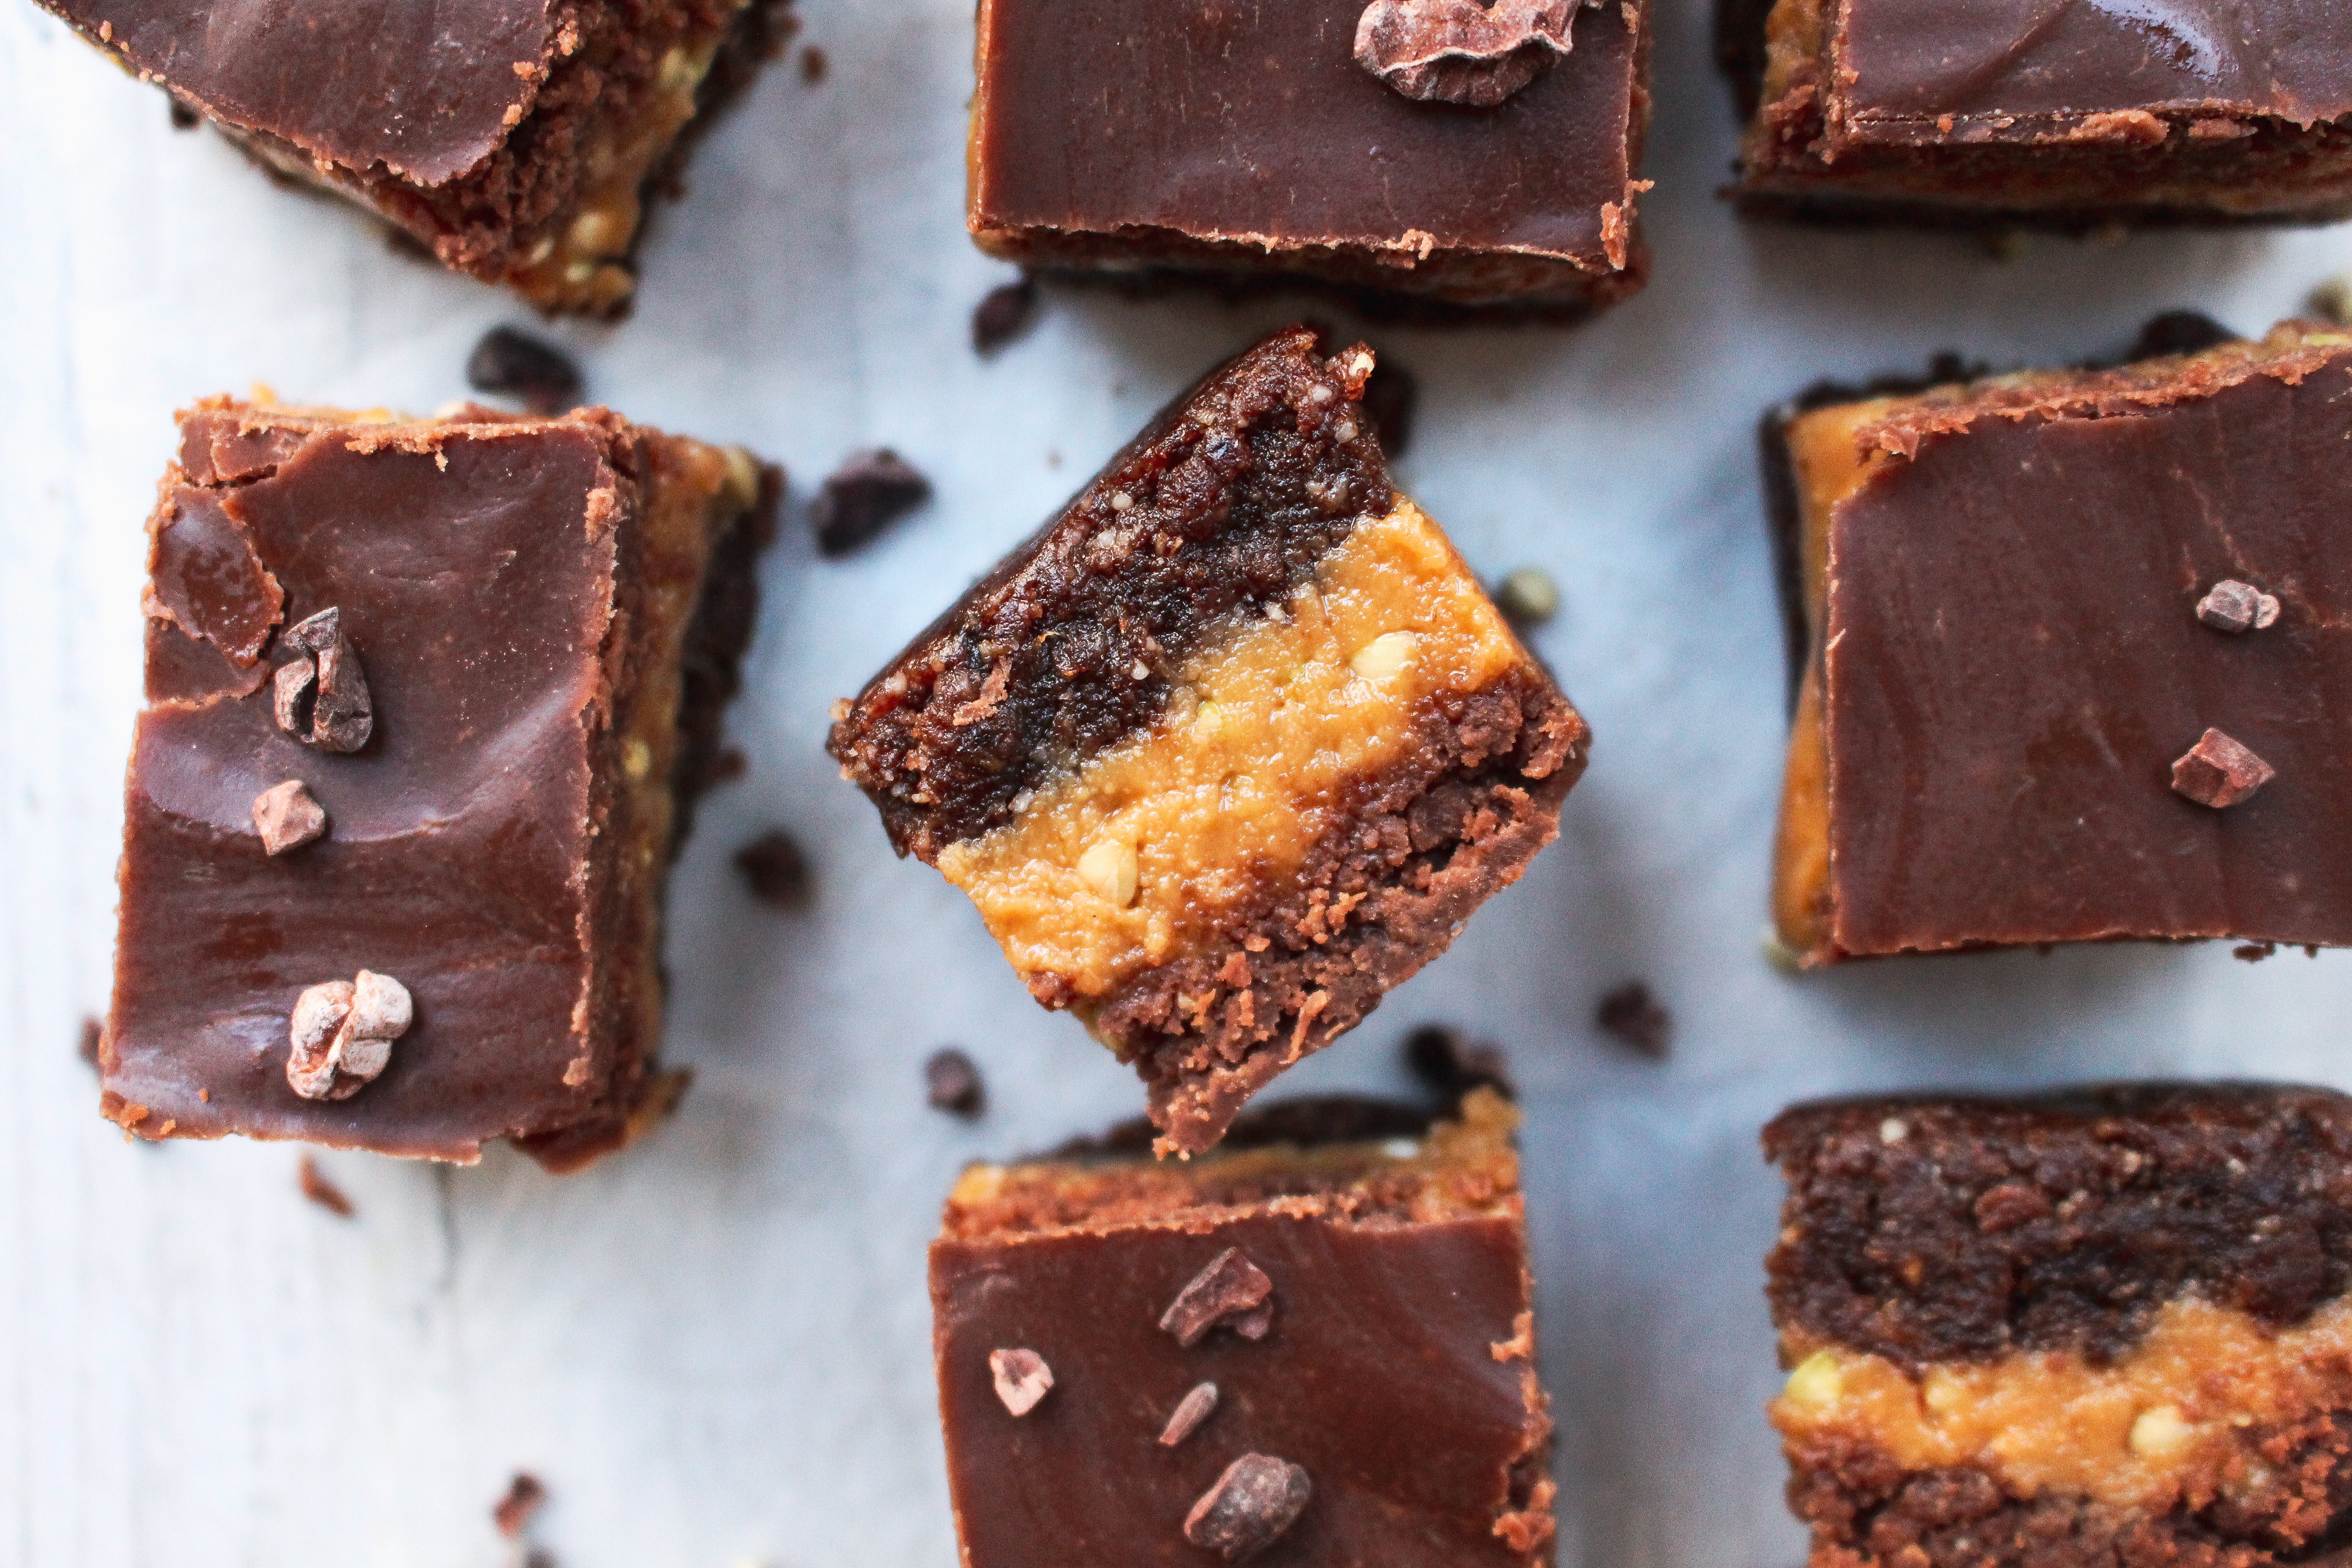 Peanut Butter Coffee Crunch Chocolate Slices